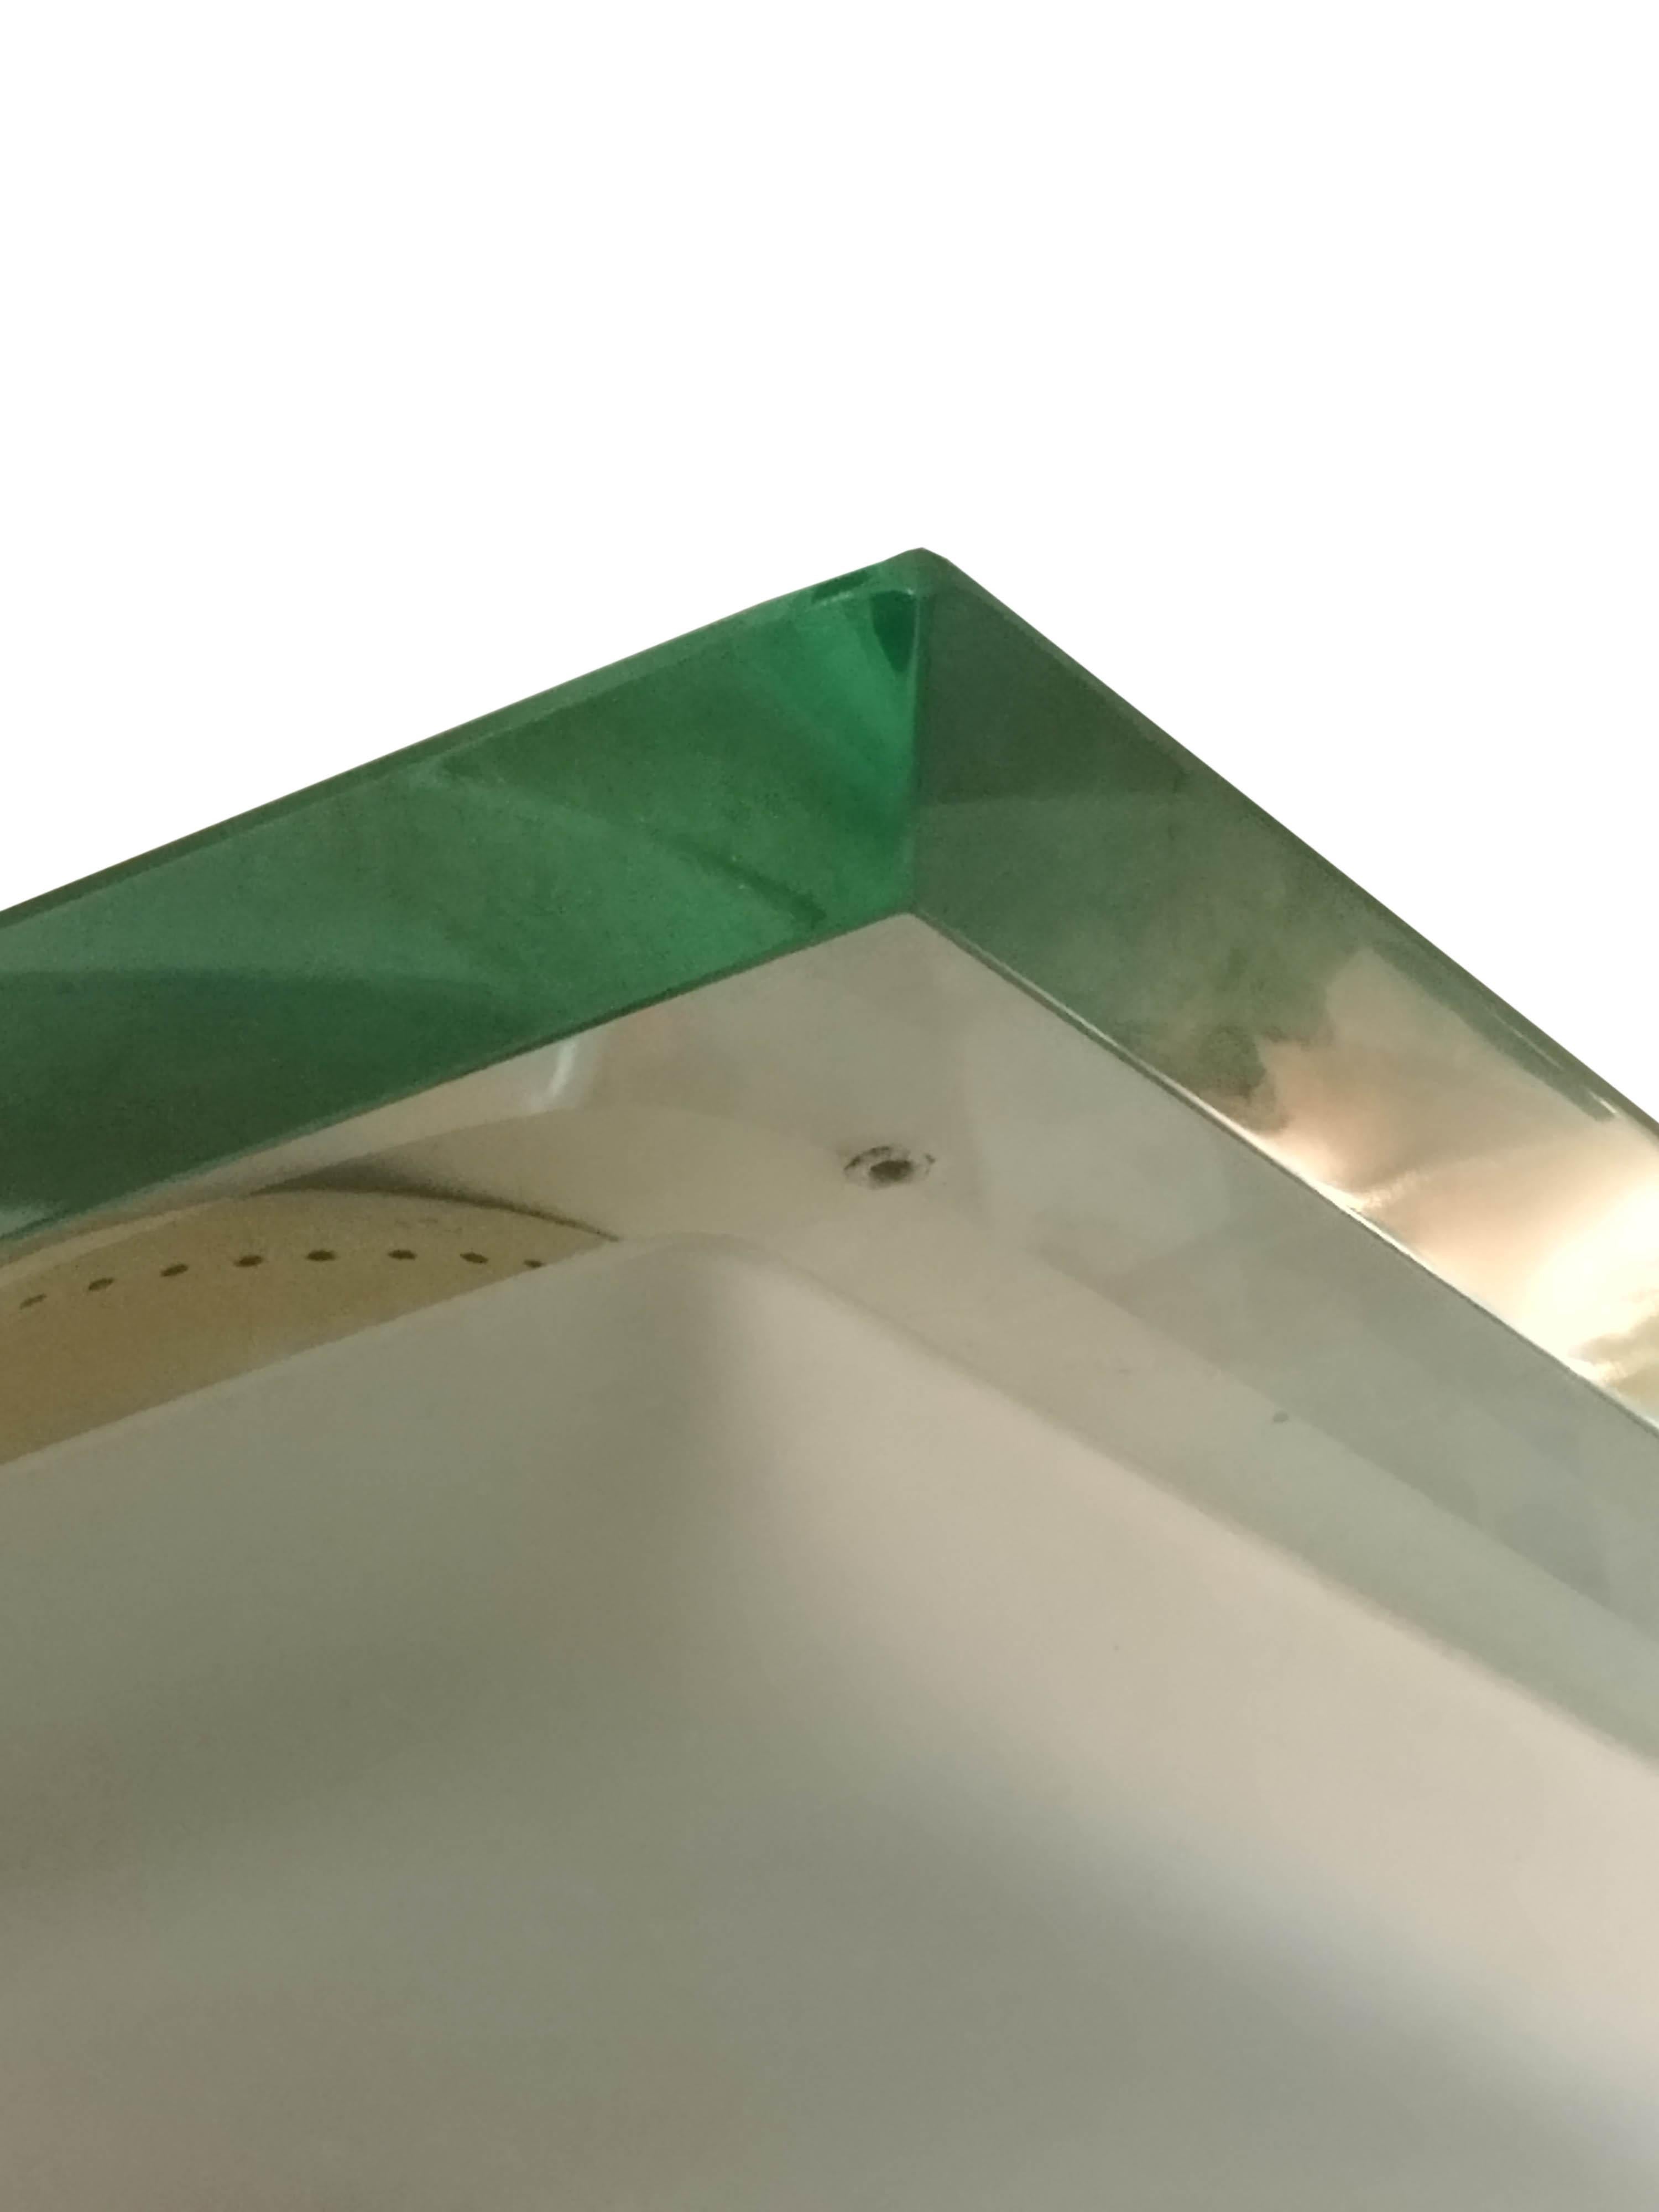 Rare Max Ingrand ceiling lamp for Fontana Arte, 1960. Painted metal, brass, frosted glass, glass. As typical of glass of the time it has a green edge that creates a beautiful emerald colour when illuminated or viewed from certain angles. The eight